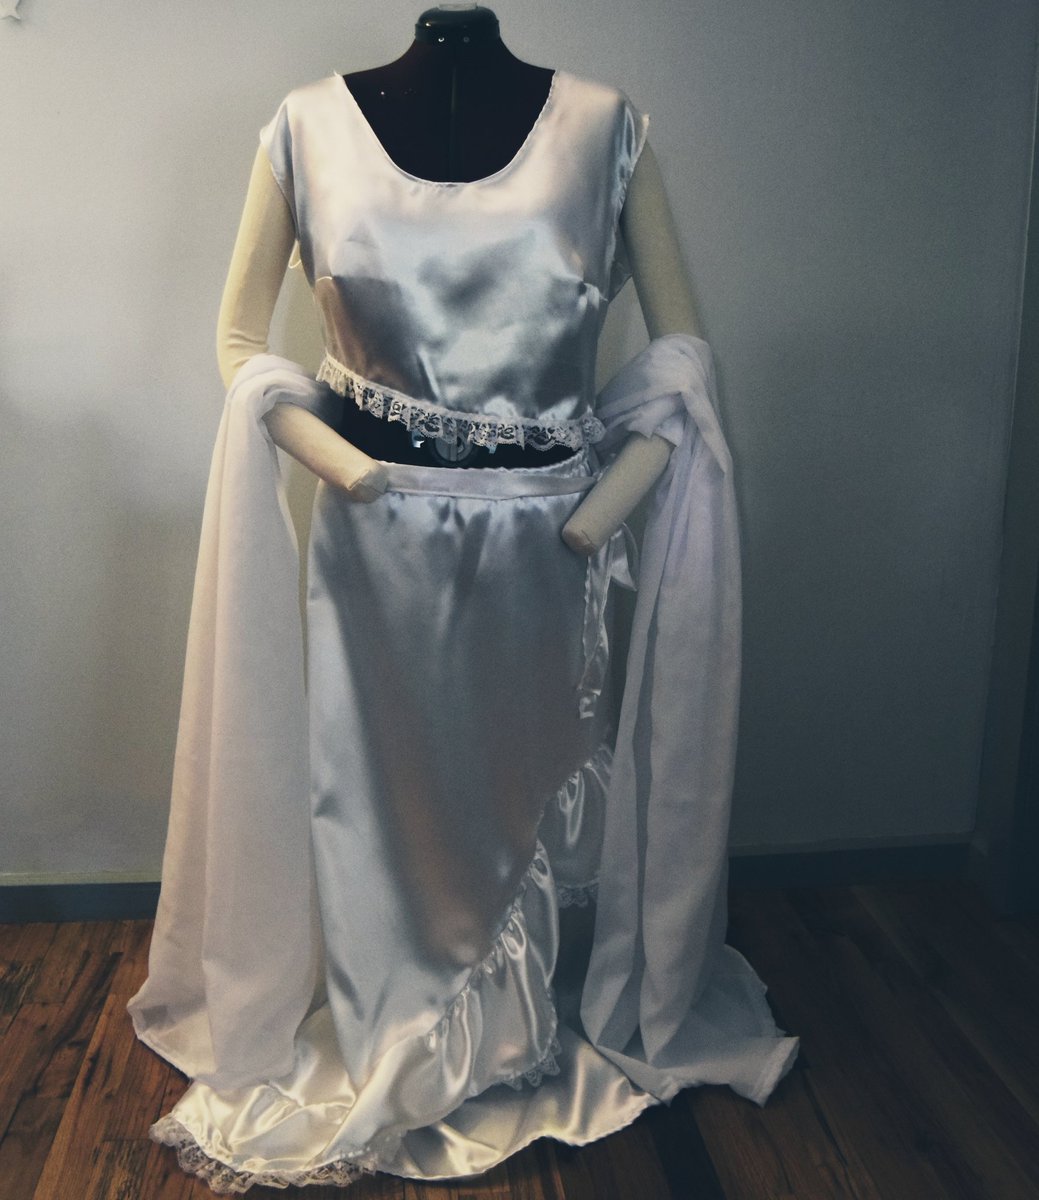 So my lucrecia cresent cosplay is officially complete!I am so happy to have her crystal dress finished. @KupoConEN #Cosplay #finished #finalfantastic #finalfantasy #dirgeofcerberus #finalfantasyvii #crystaldress #beautiful #lucreciacresent #thebiggerpom #kupocon2019 #hype